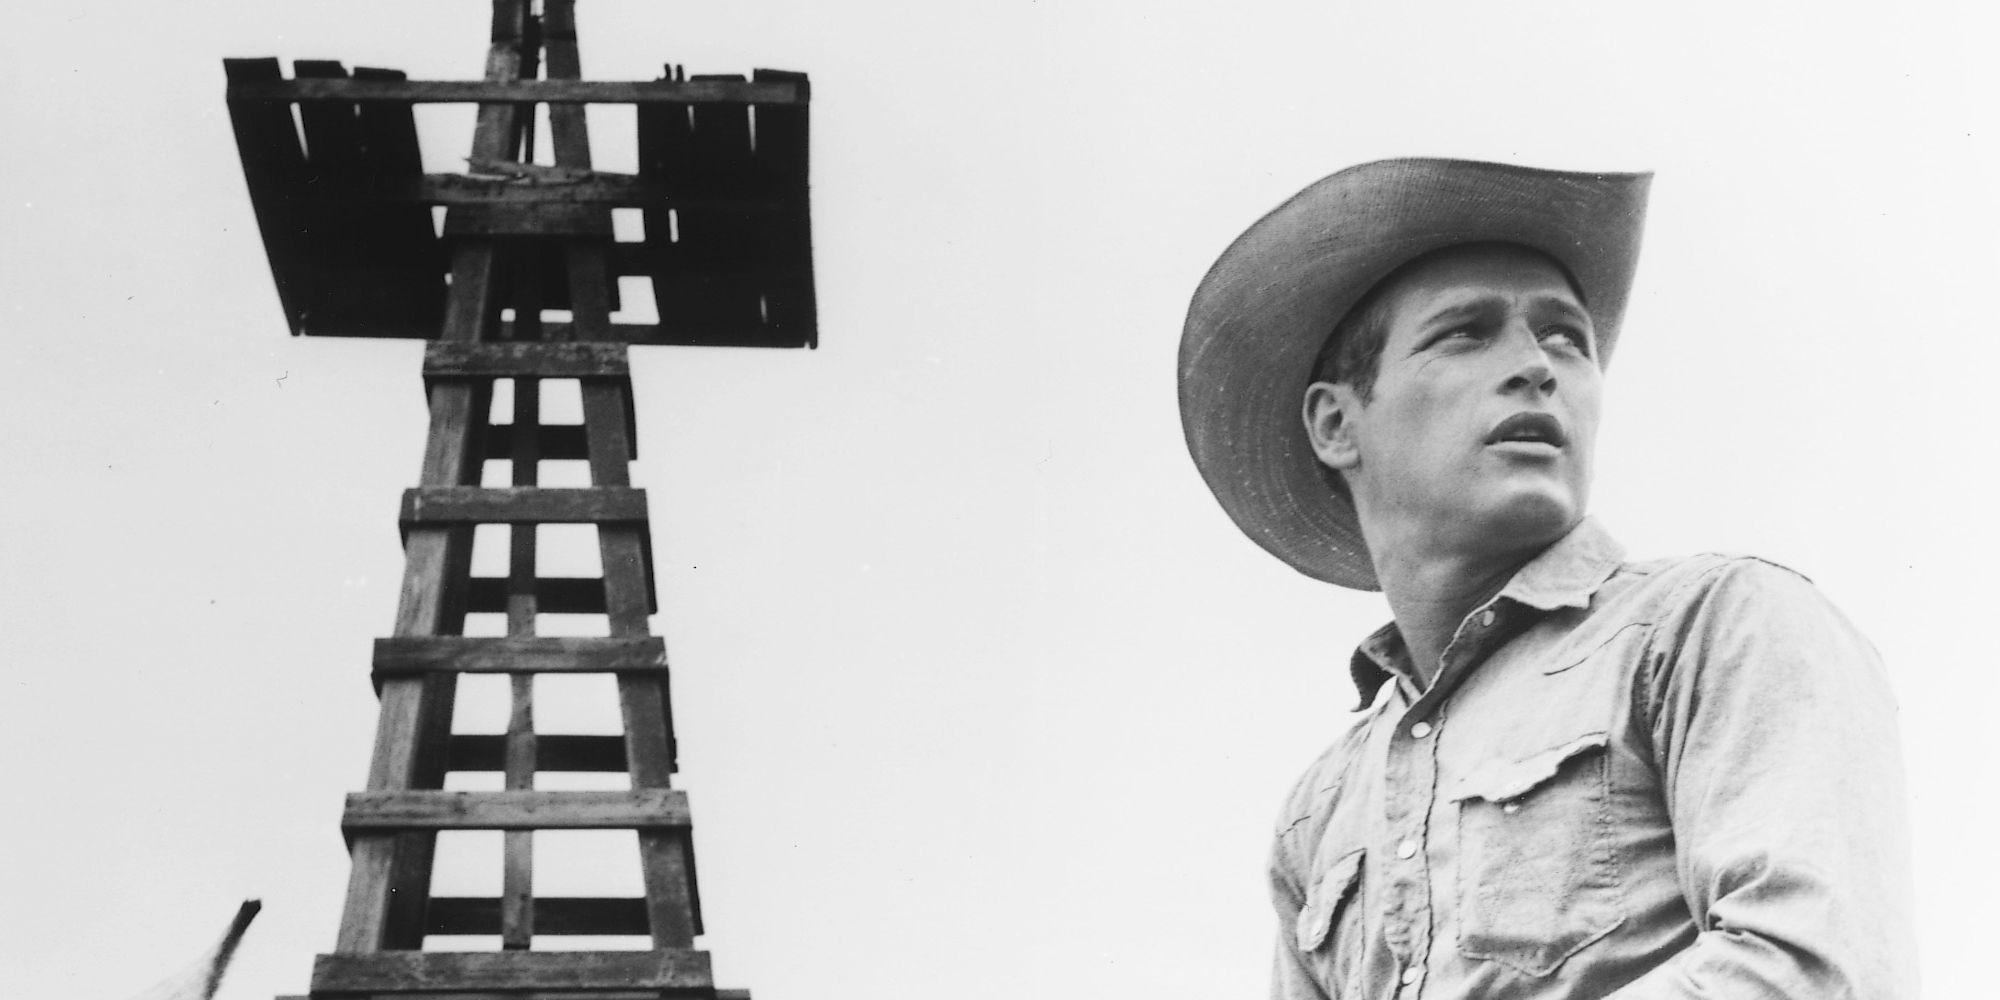 Paul Newman as Hud turning back to look into the distance in the film Hud.